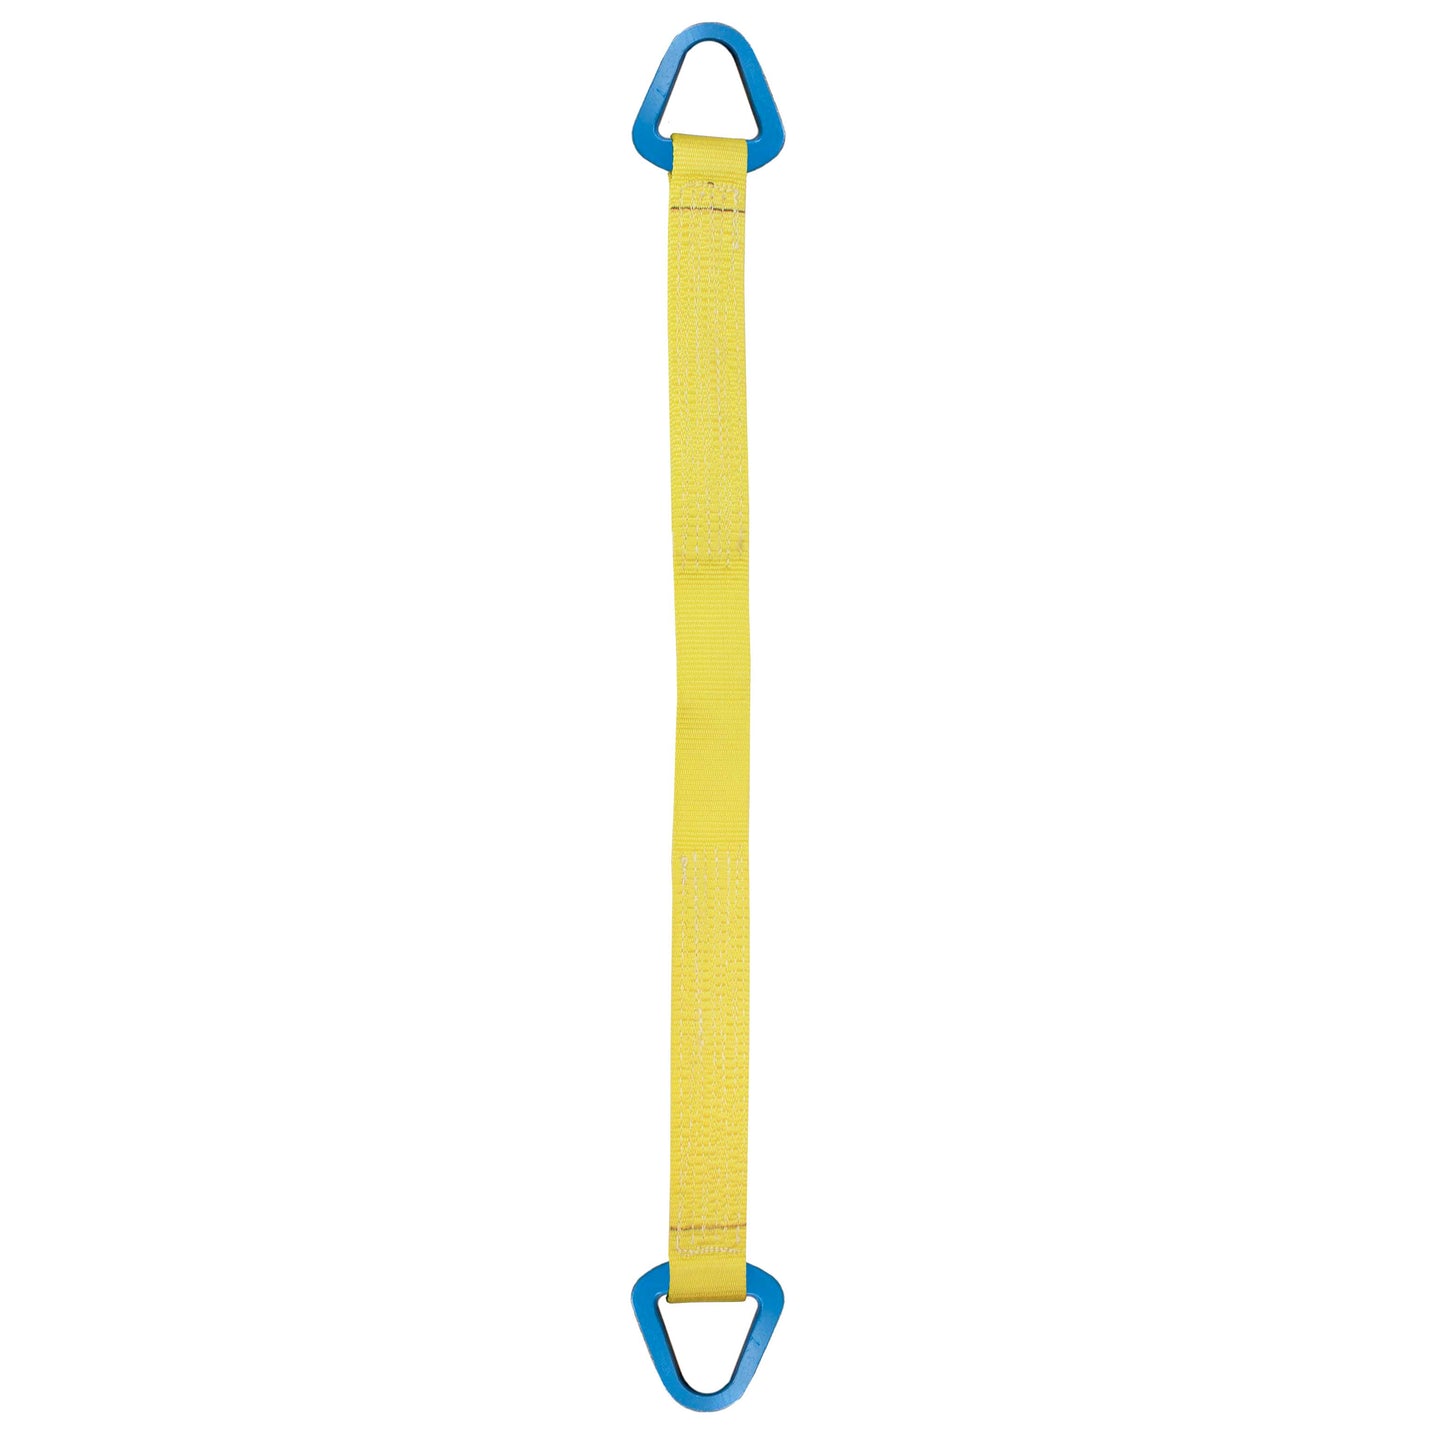 Nylon Lifting Sling Triangle 2 inch x 3 foot 2ply image 1 of 2